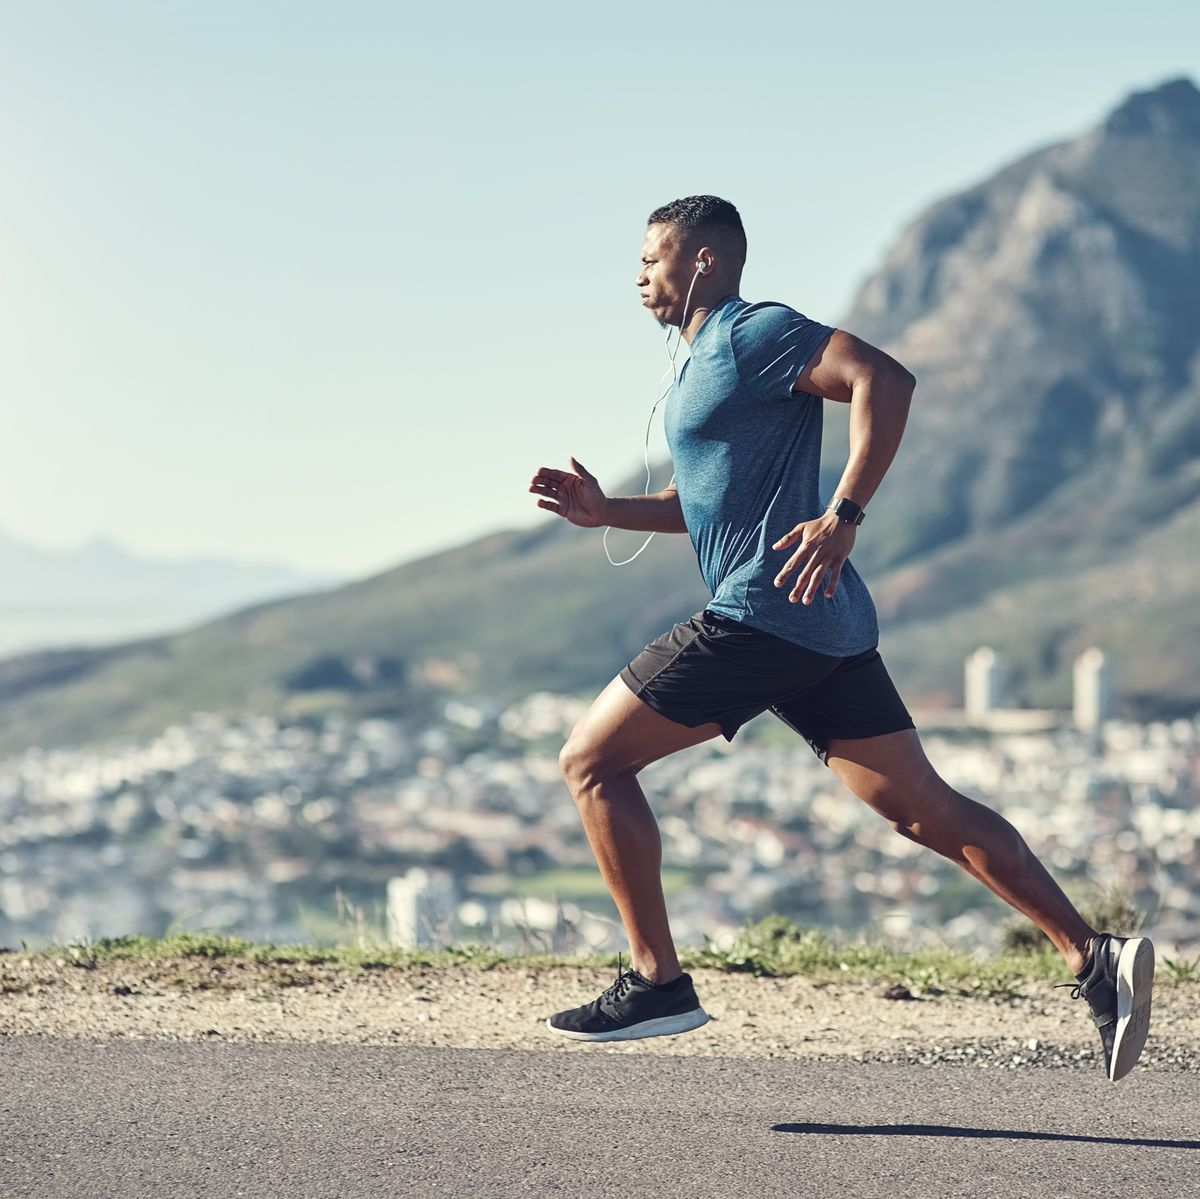 Training Styles and Techniques to Increase Running Speed and Distance